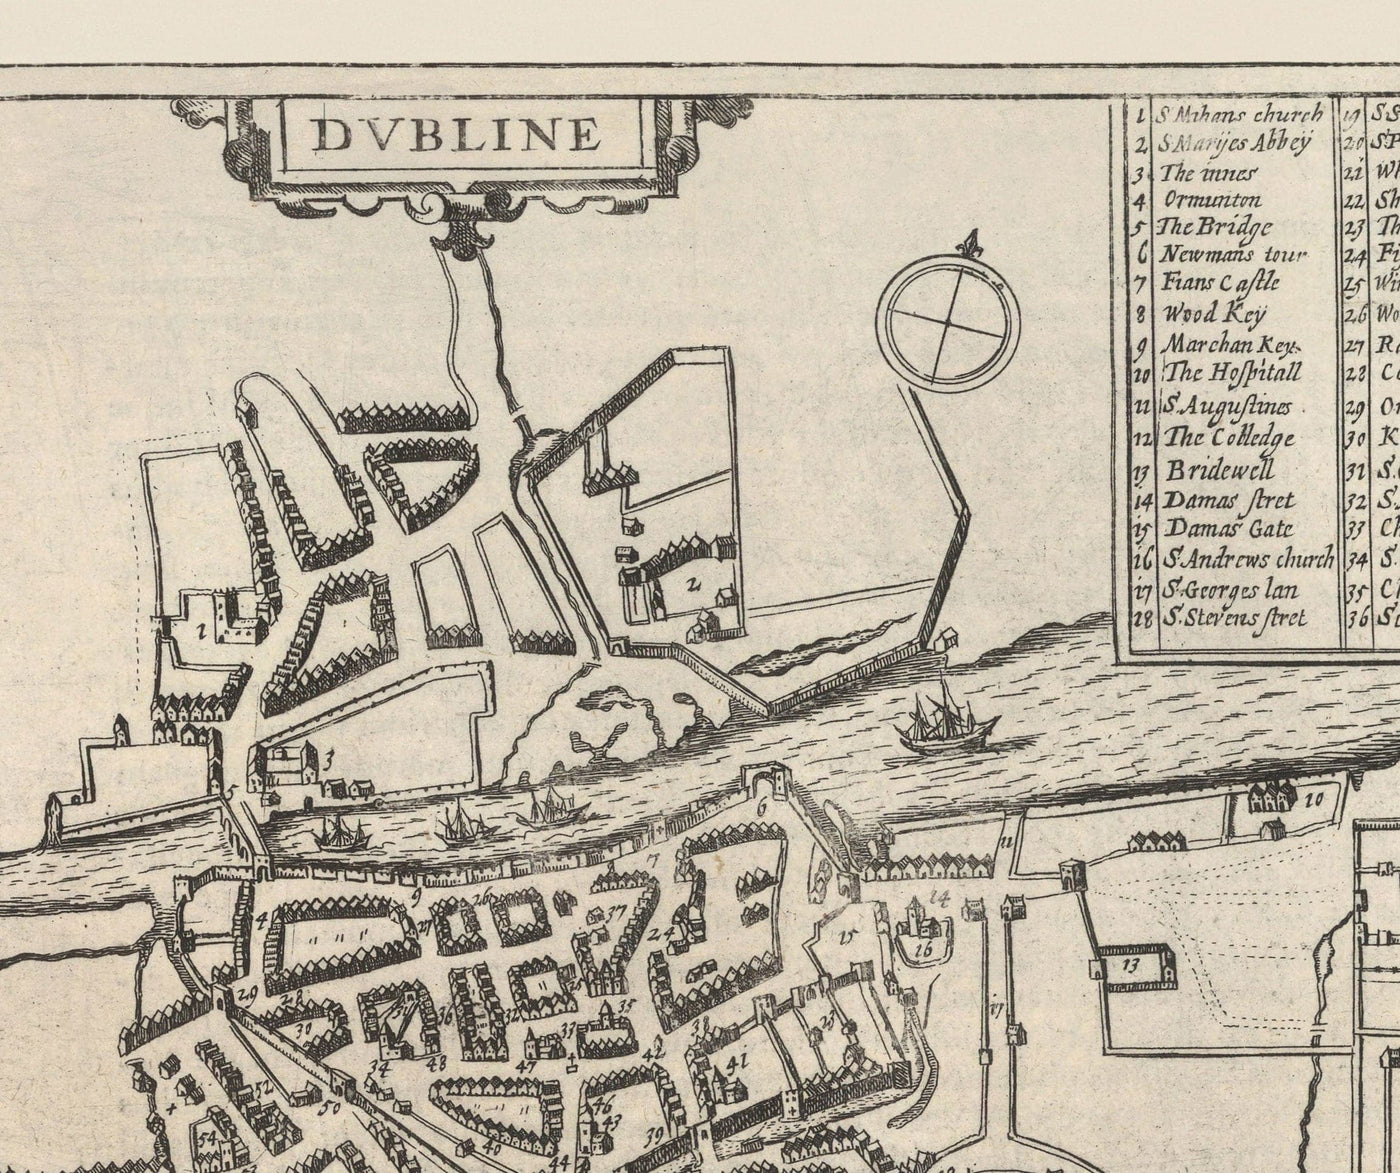 Old map of Dublin, Limerick, Cork and Galway in 1618 by Georg Braun - Ancient Eire City Charts